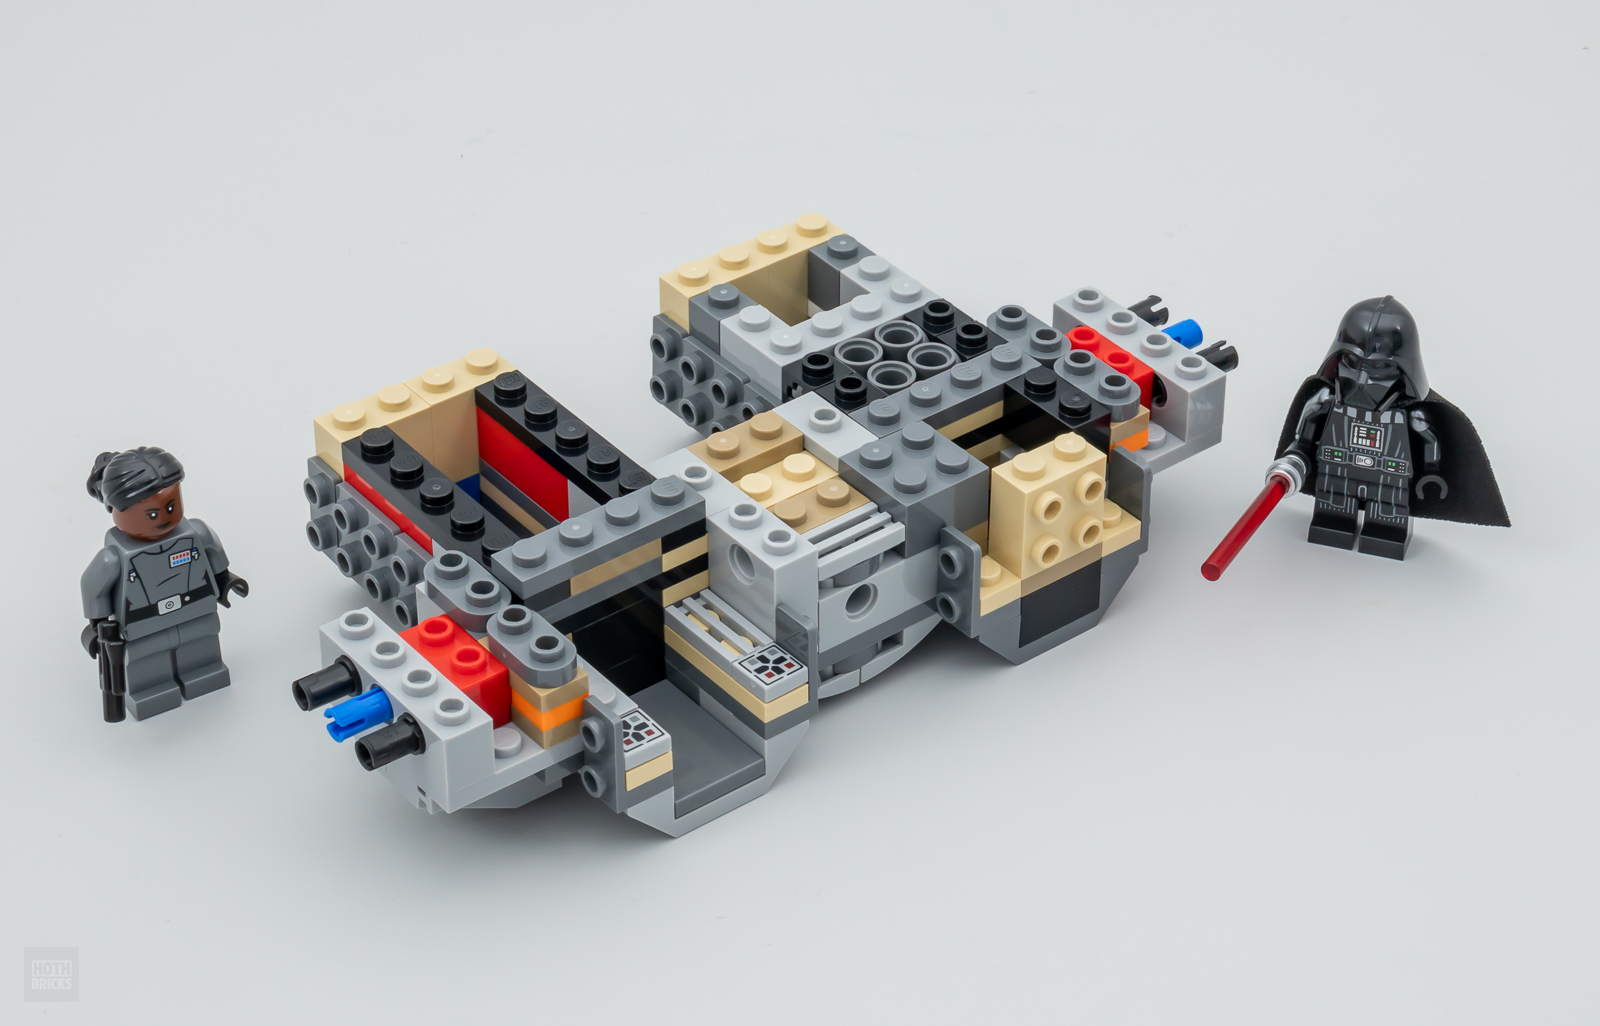 Support pour LEGO 75347 Tie Bomber